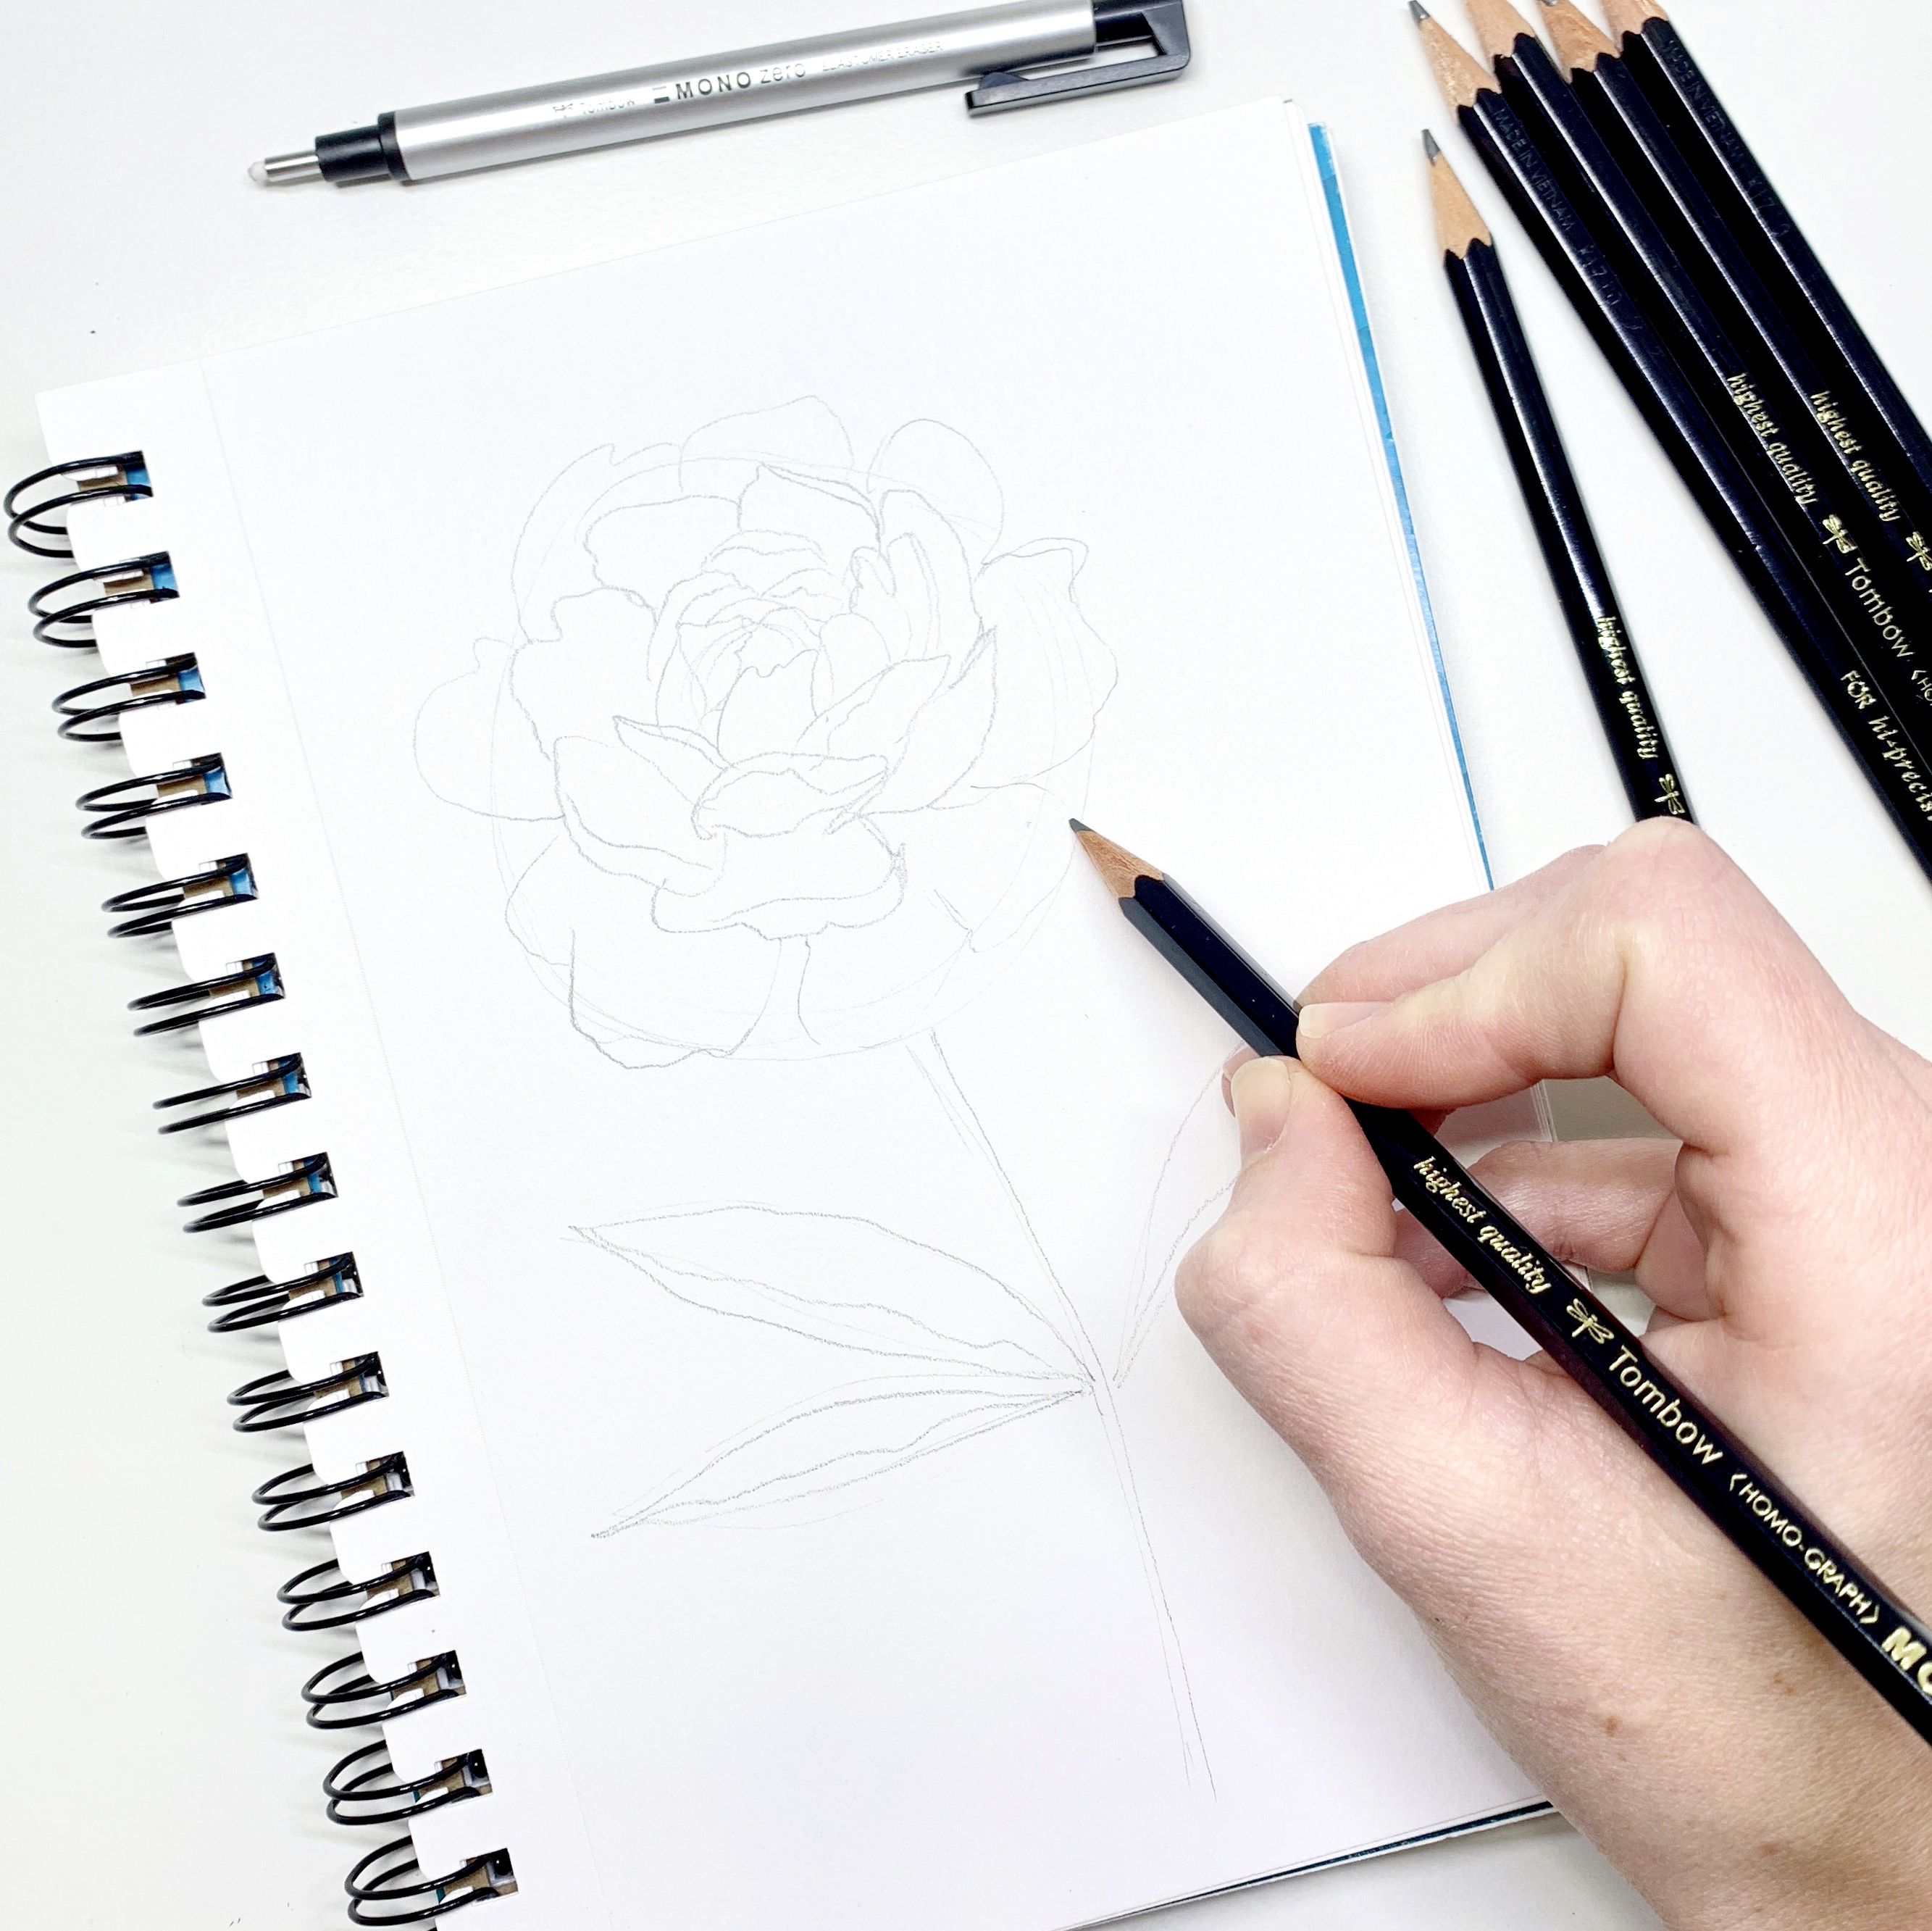 Pencil Shading Tips for Easily Sketching Flowers - Tombow USA Blog